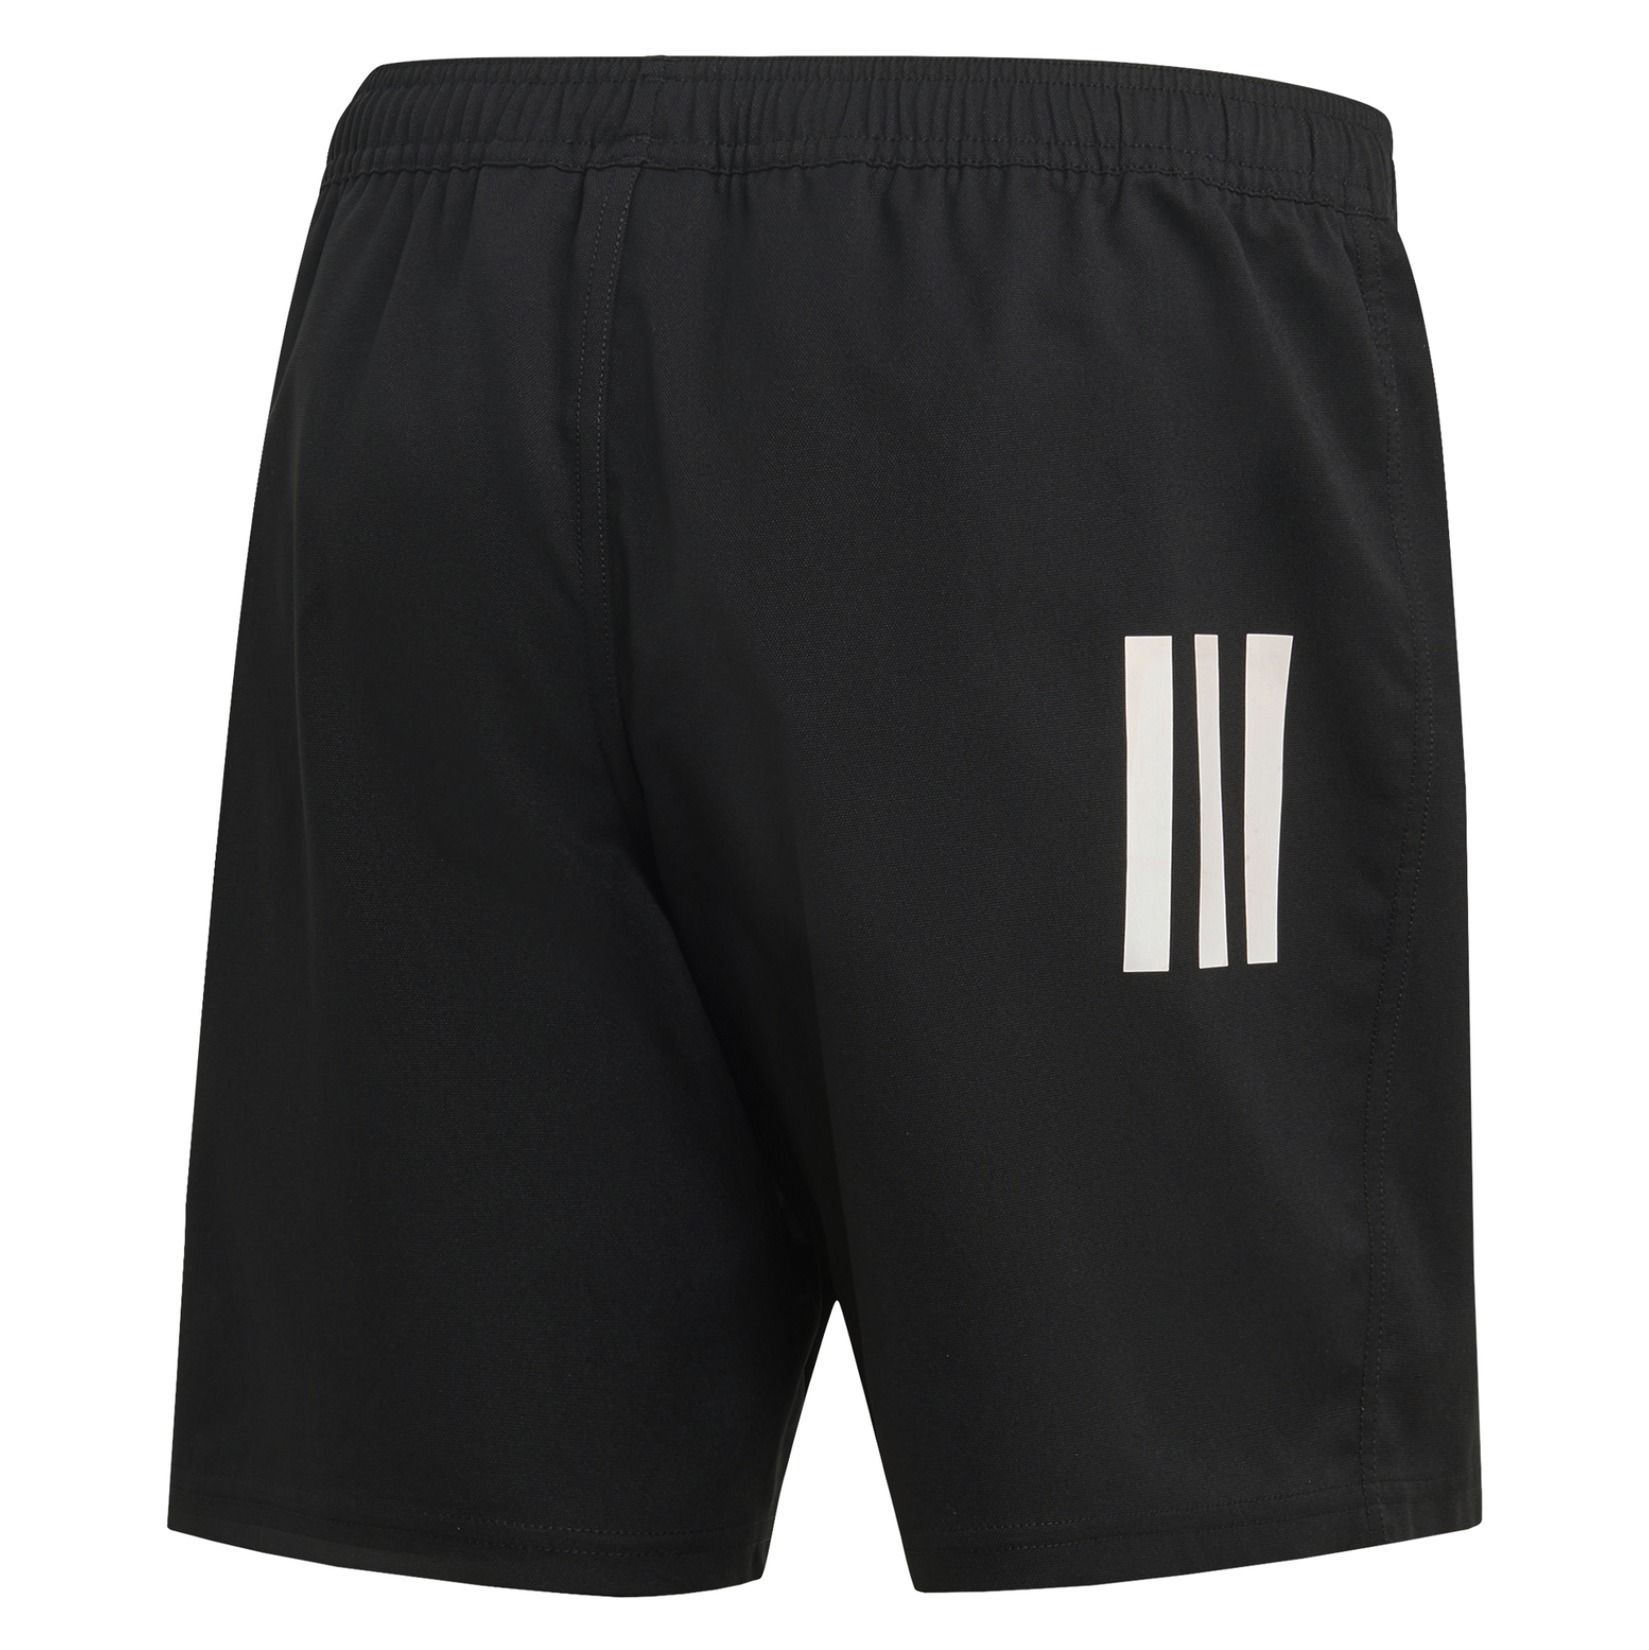 Adidas Classic 3s Rugby Shorts